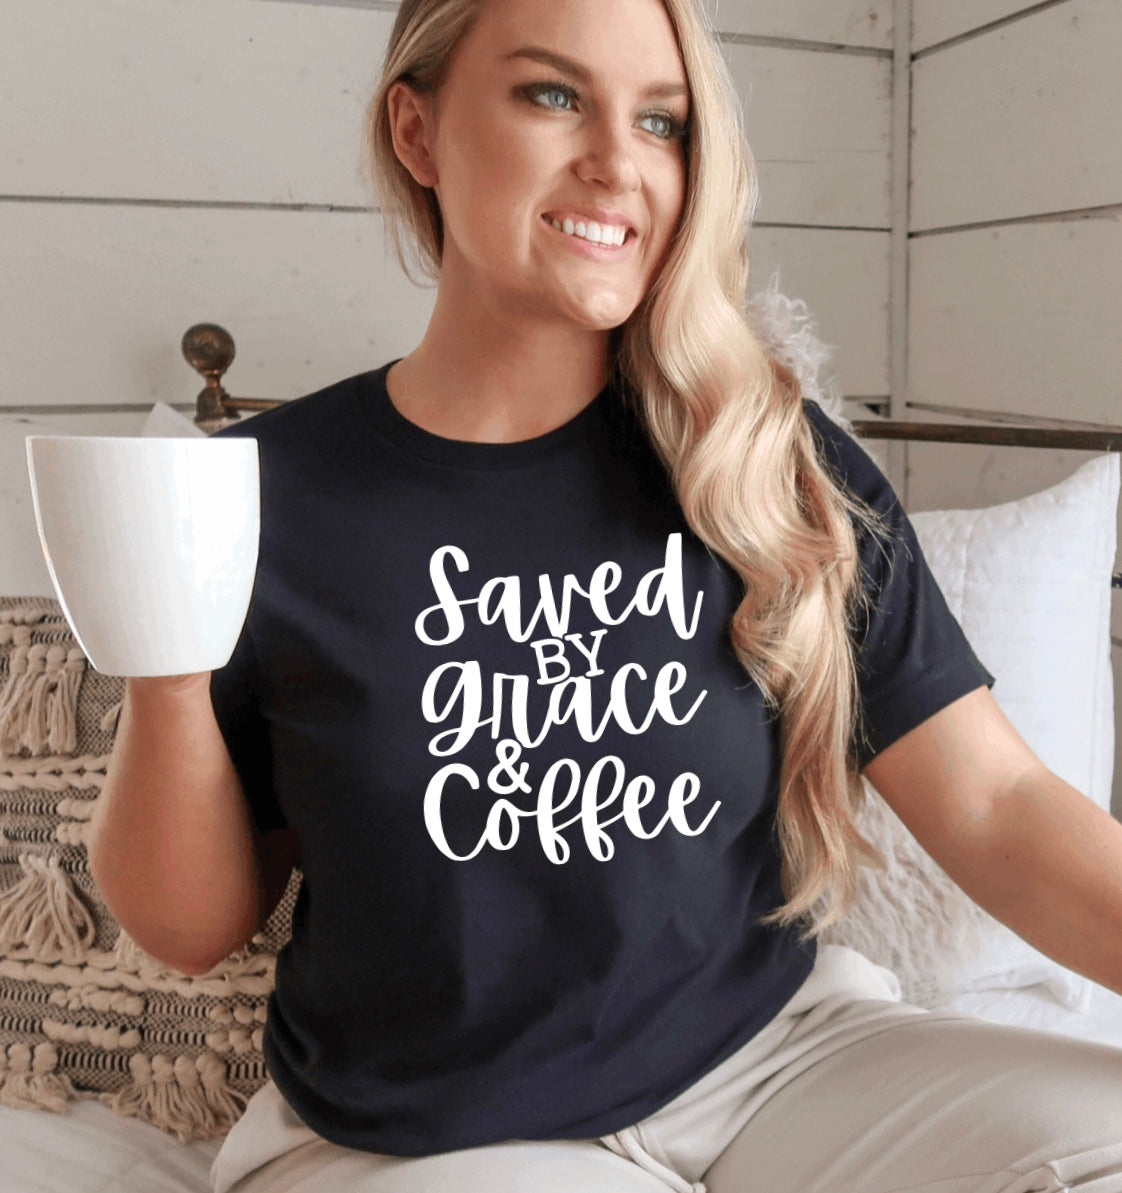 Saved by Grace and coffee t-shirt 